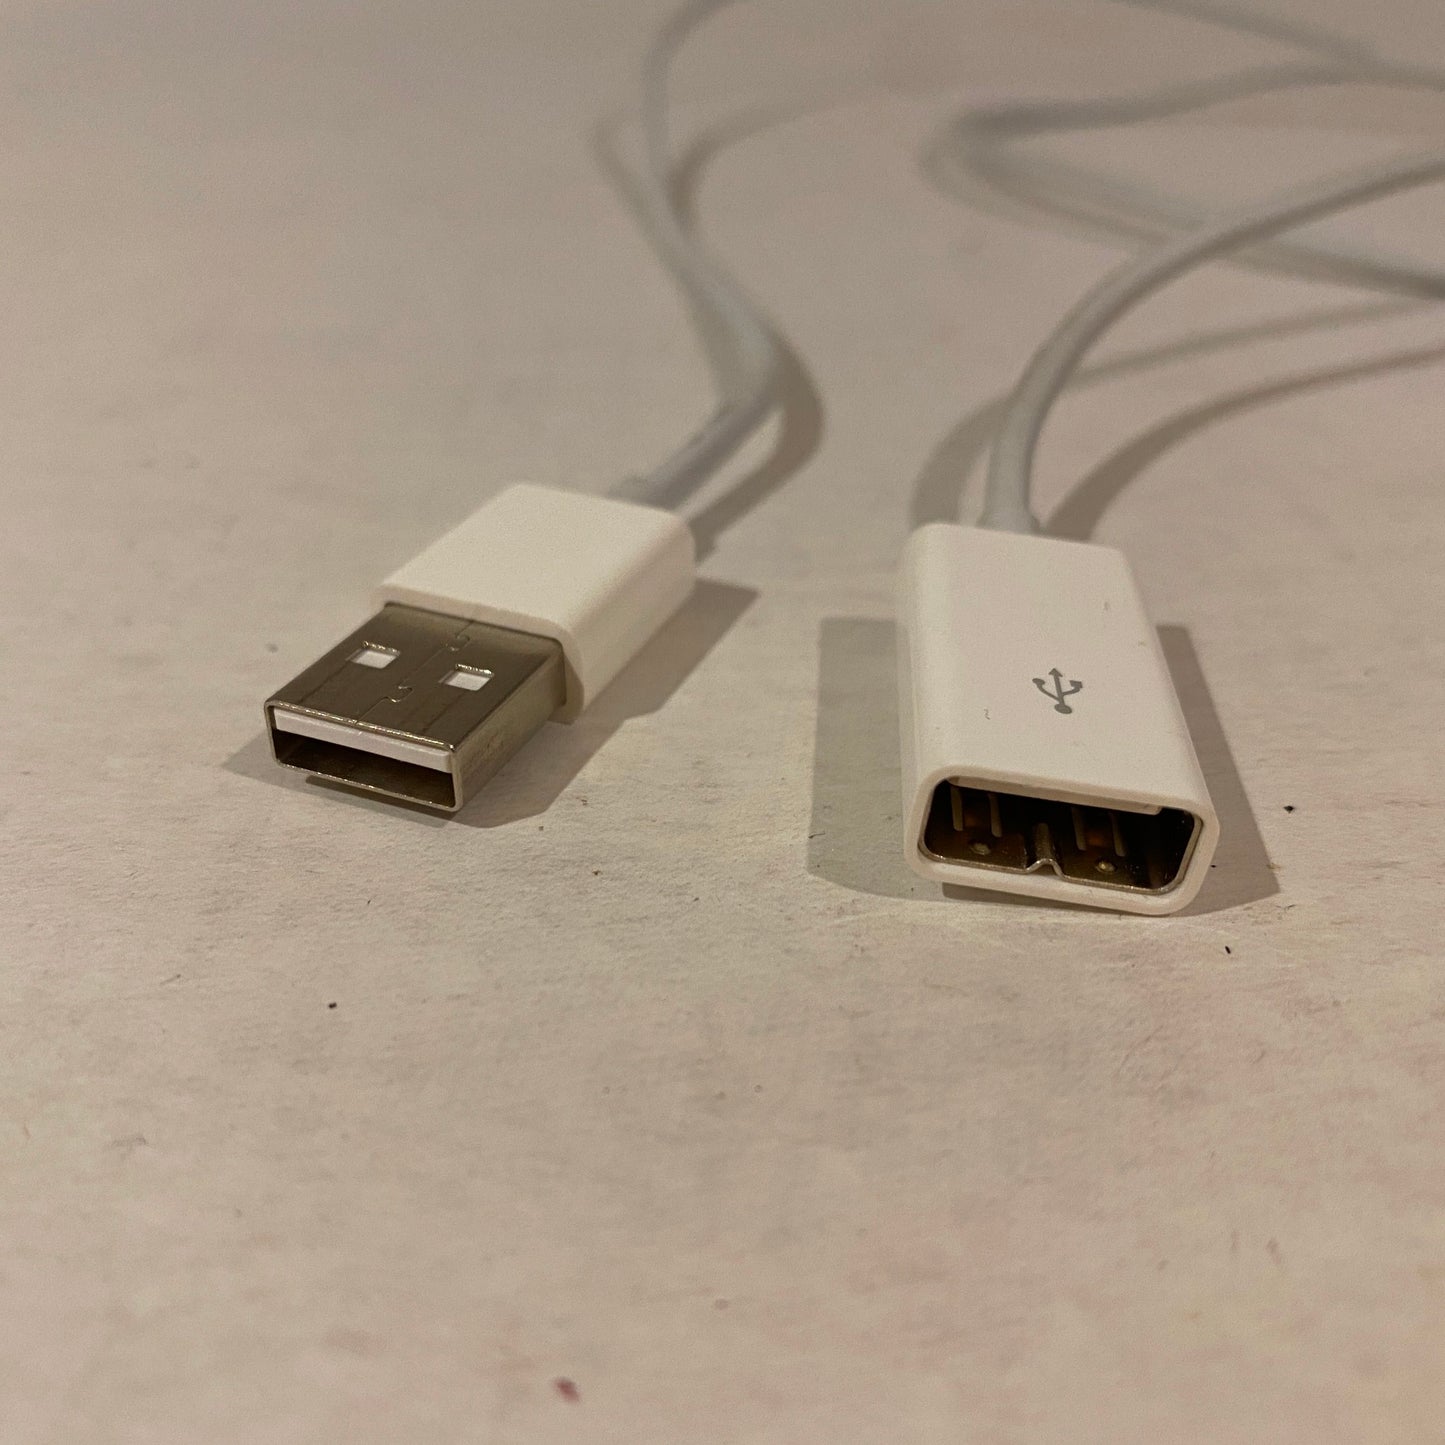 3ft USB Extension Cable for Apple Keyboard